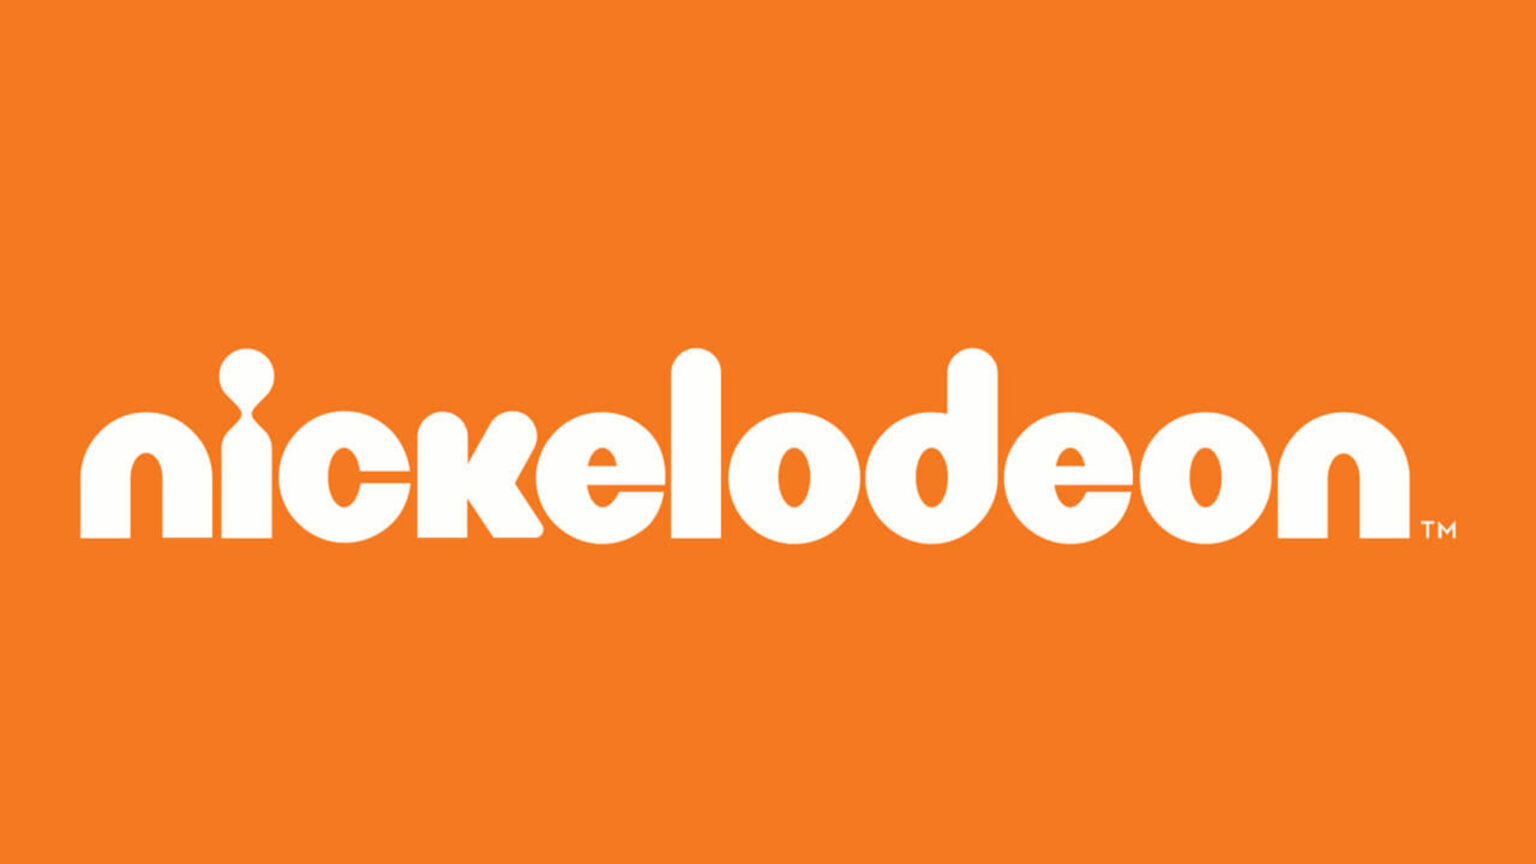 Nickelodeon was a huge part of most of your childhoods. Revisit these memories with a rundown of the classic Nick TV shows.